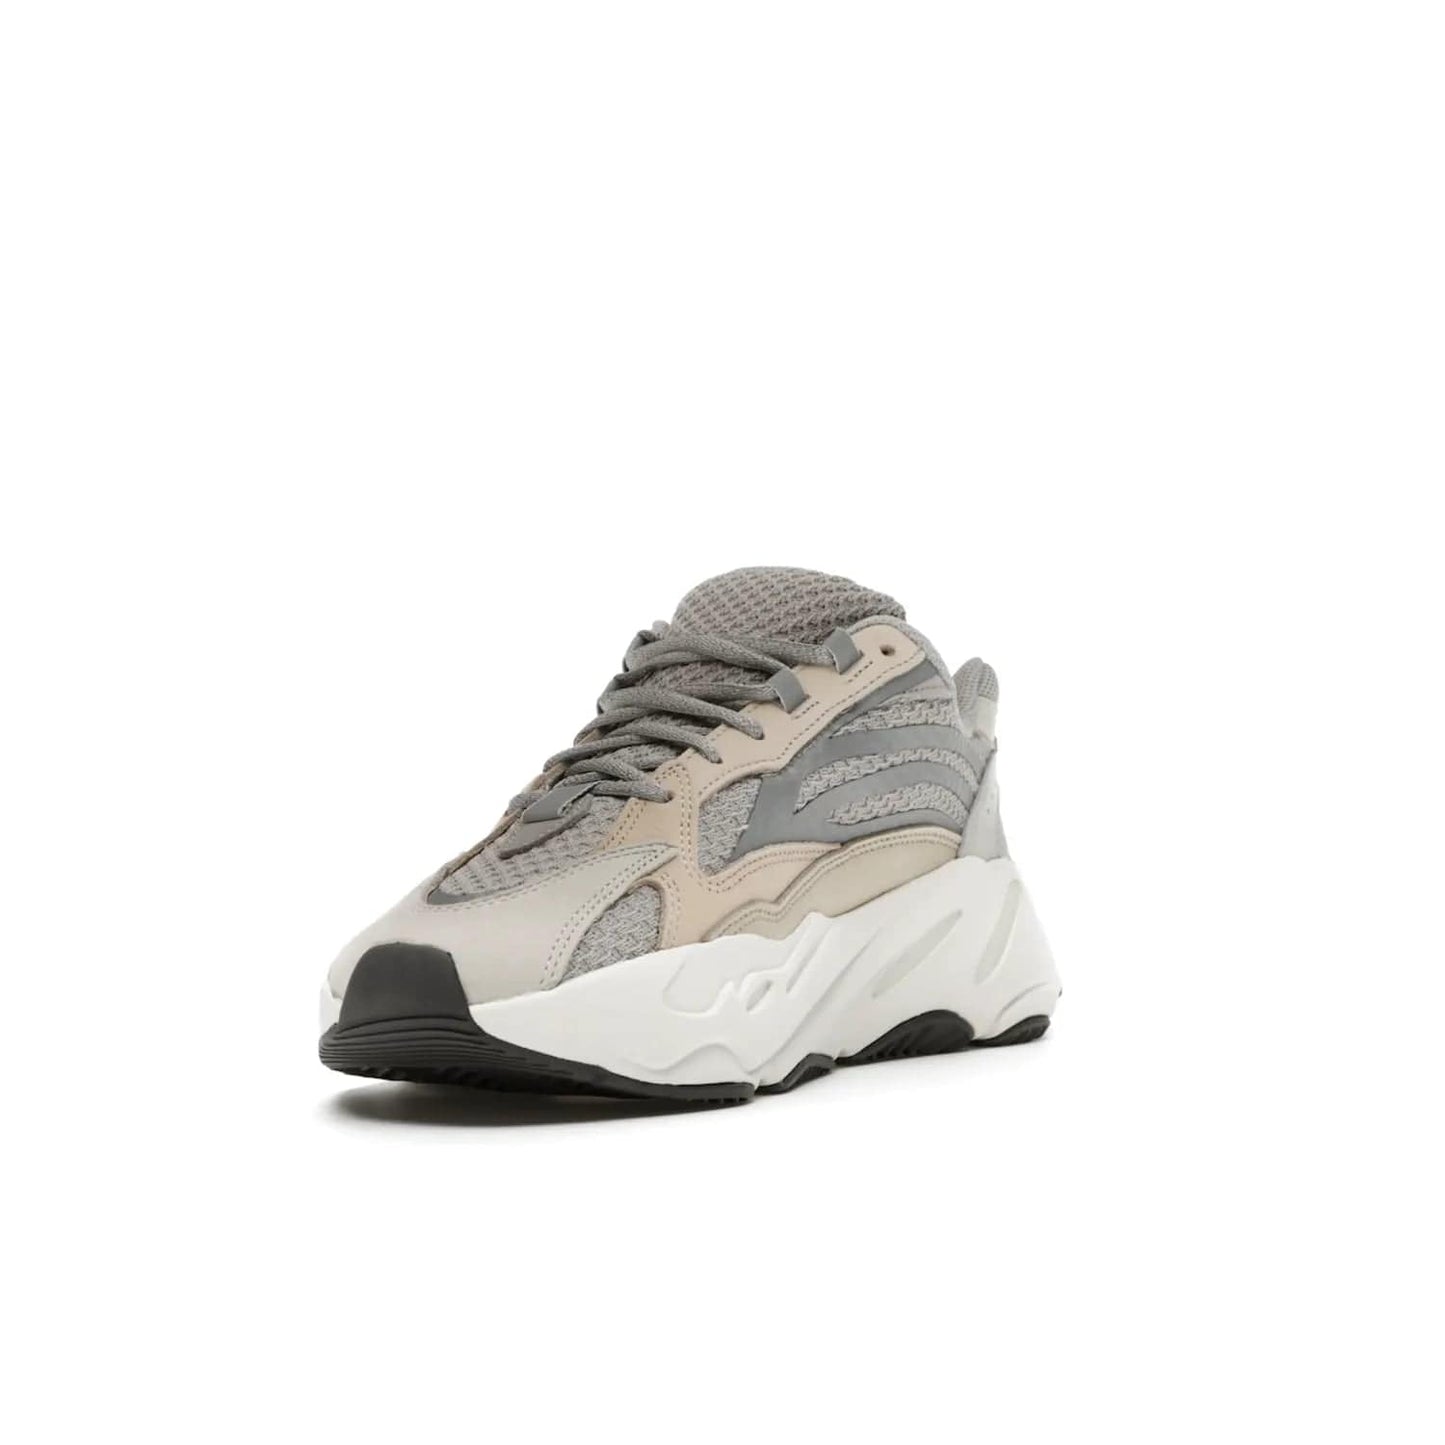 adidas Yeezy Boost 700 V2 Cream - Image 13 - Only at www.BallersClubKickz.com - Add style and luxury to your wardrobe with the adidas Yeezy 700 V2 Cream. Featuring a unique reflective upper, leather overlays, mesh underlays and the signature BOOST midsole, this silhouette is perfect for any stylish wardrobe.